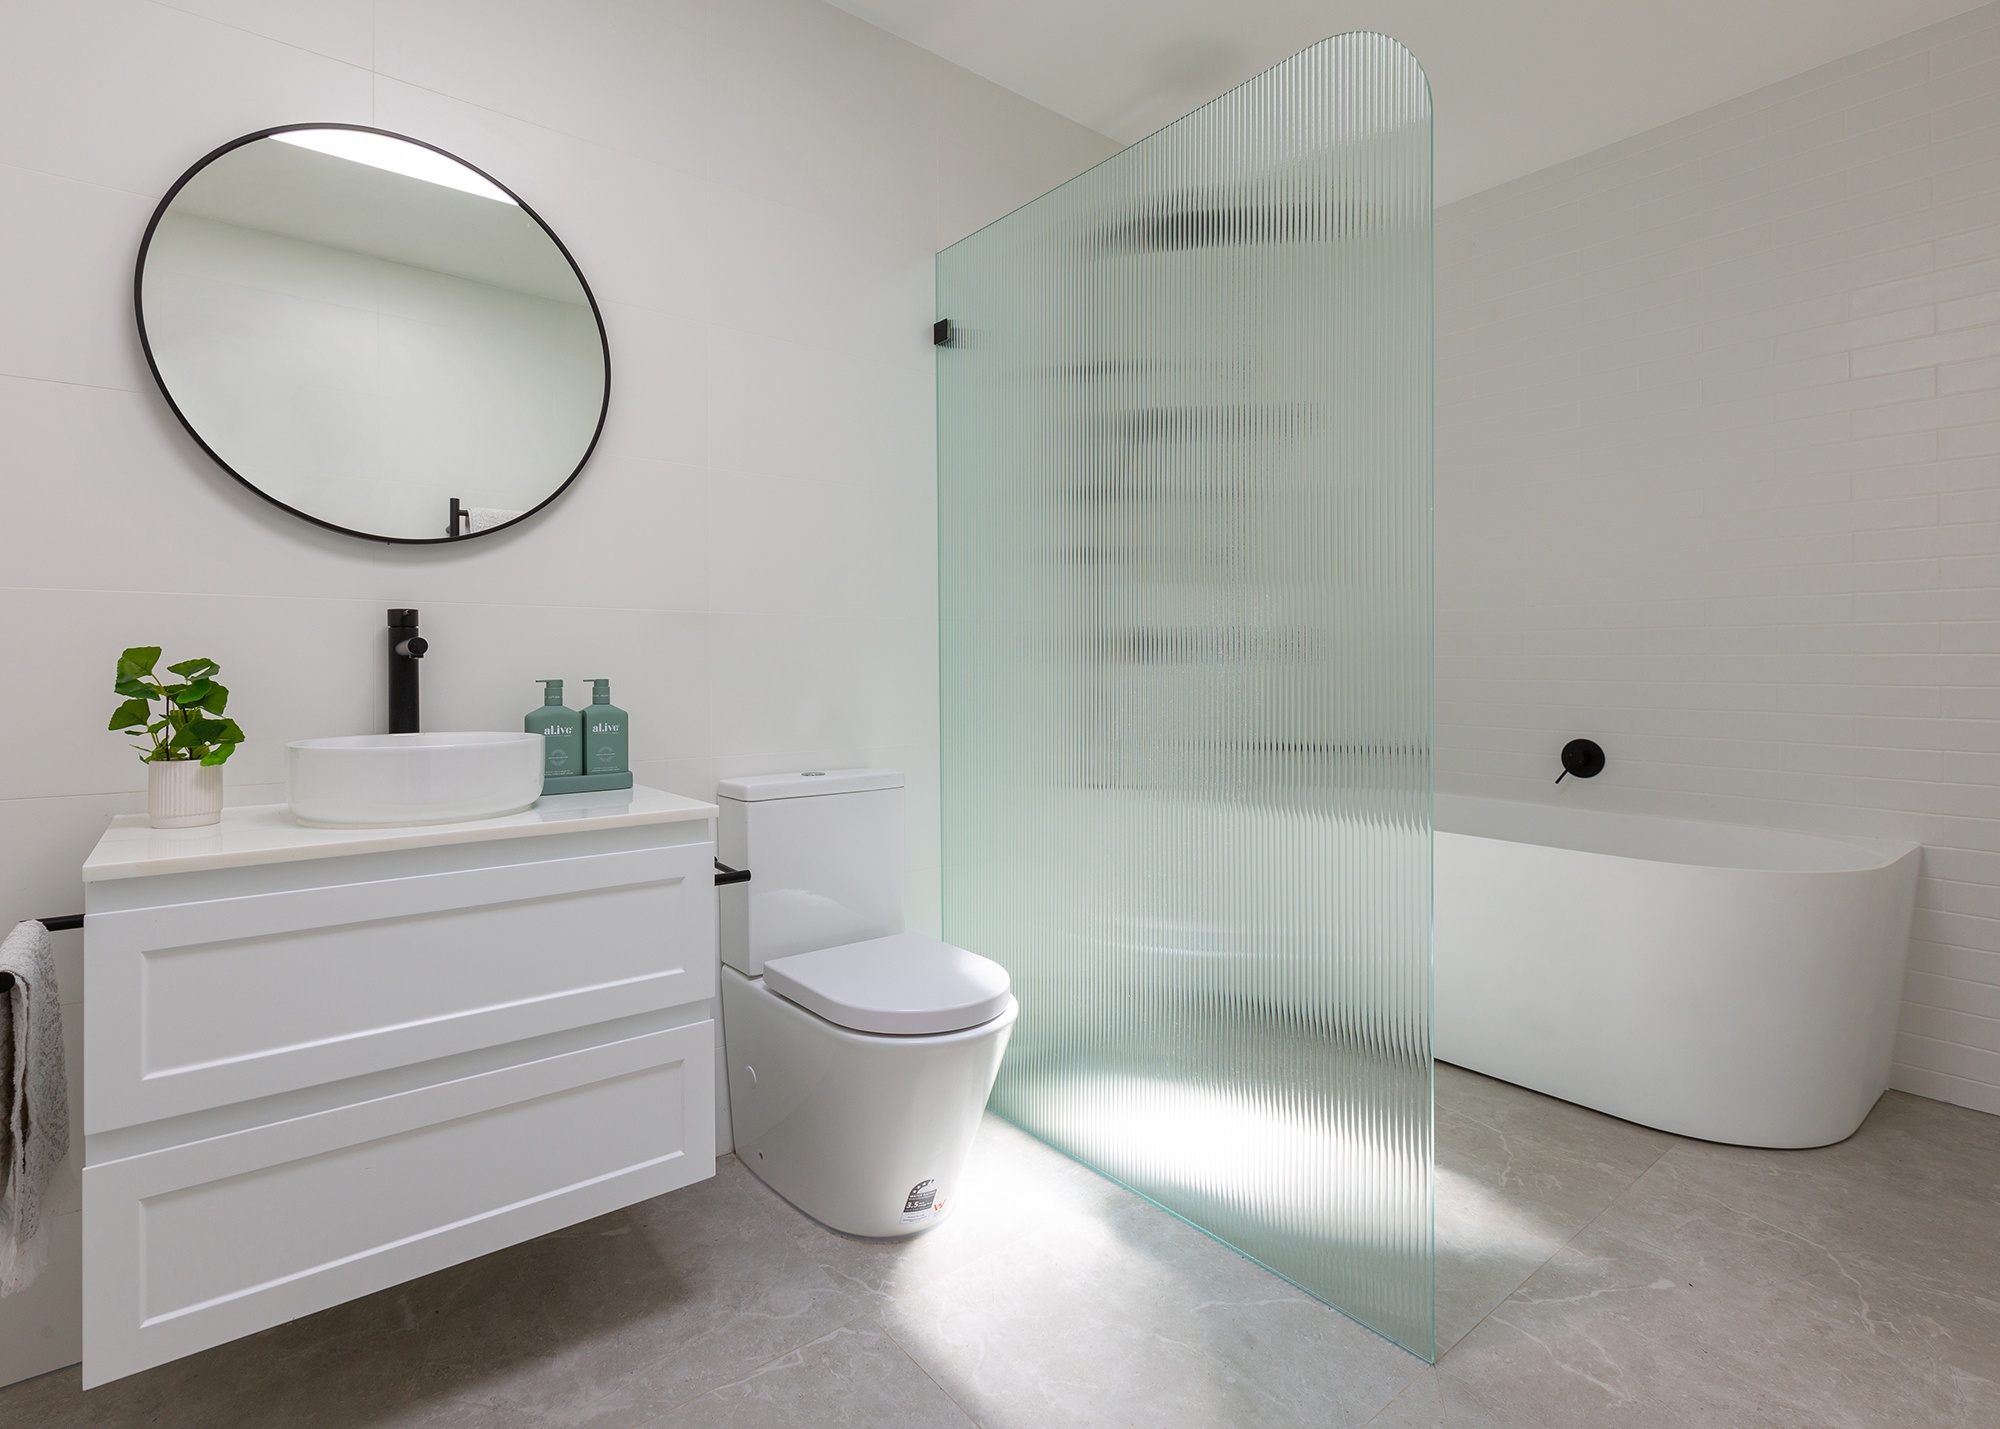 DIY vs. Hiring a Professional: Which Option is More Budget-Friendly for Bathroom Remodeling?